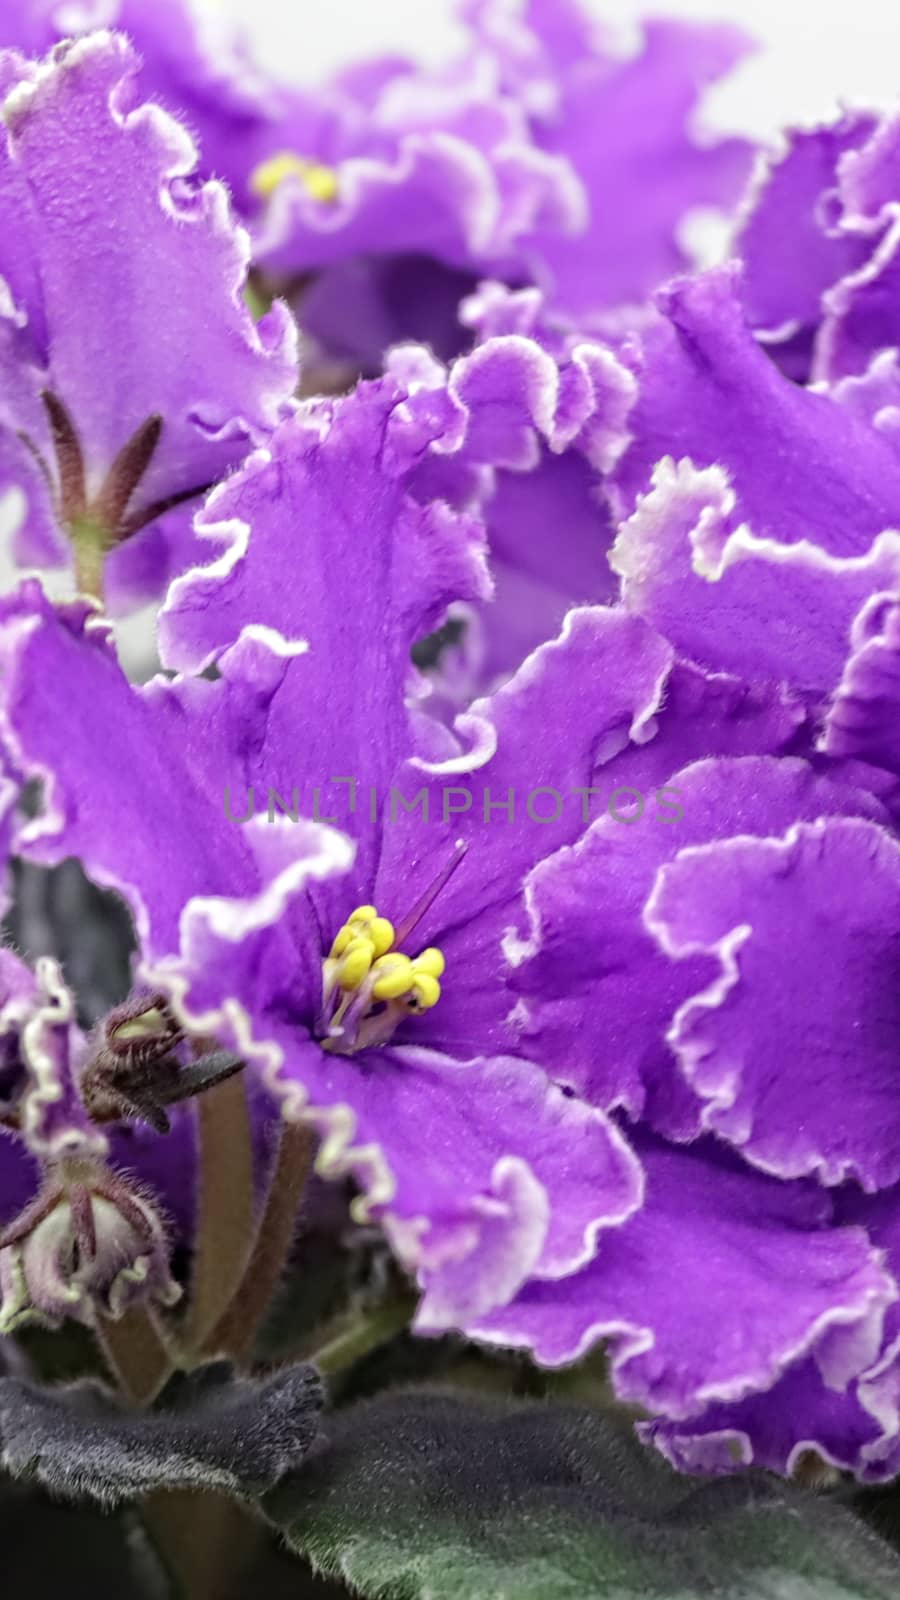 Beautiful Saintpaulia or Uzumbar violet. Purple indoor flowers close-up. Natural floral background for happy birthday, mother's day, women's day, anniversary, wedding invitation